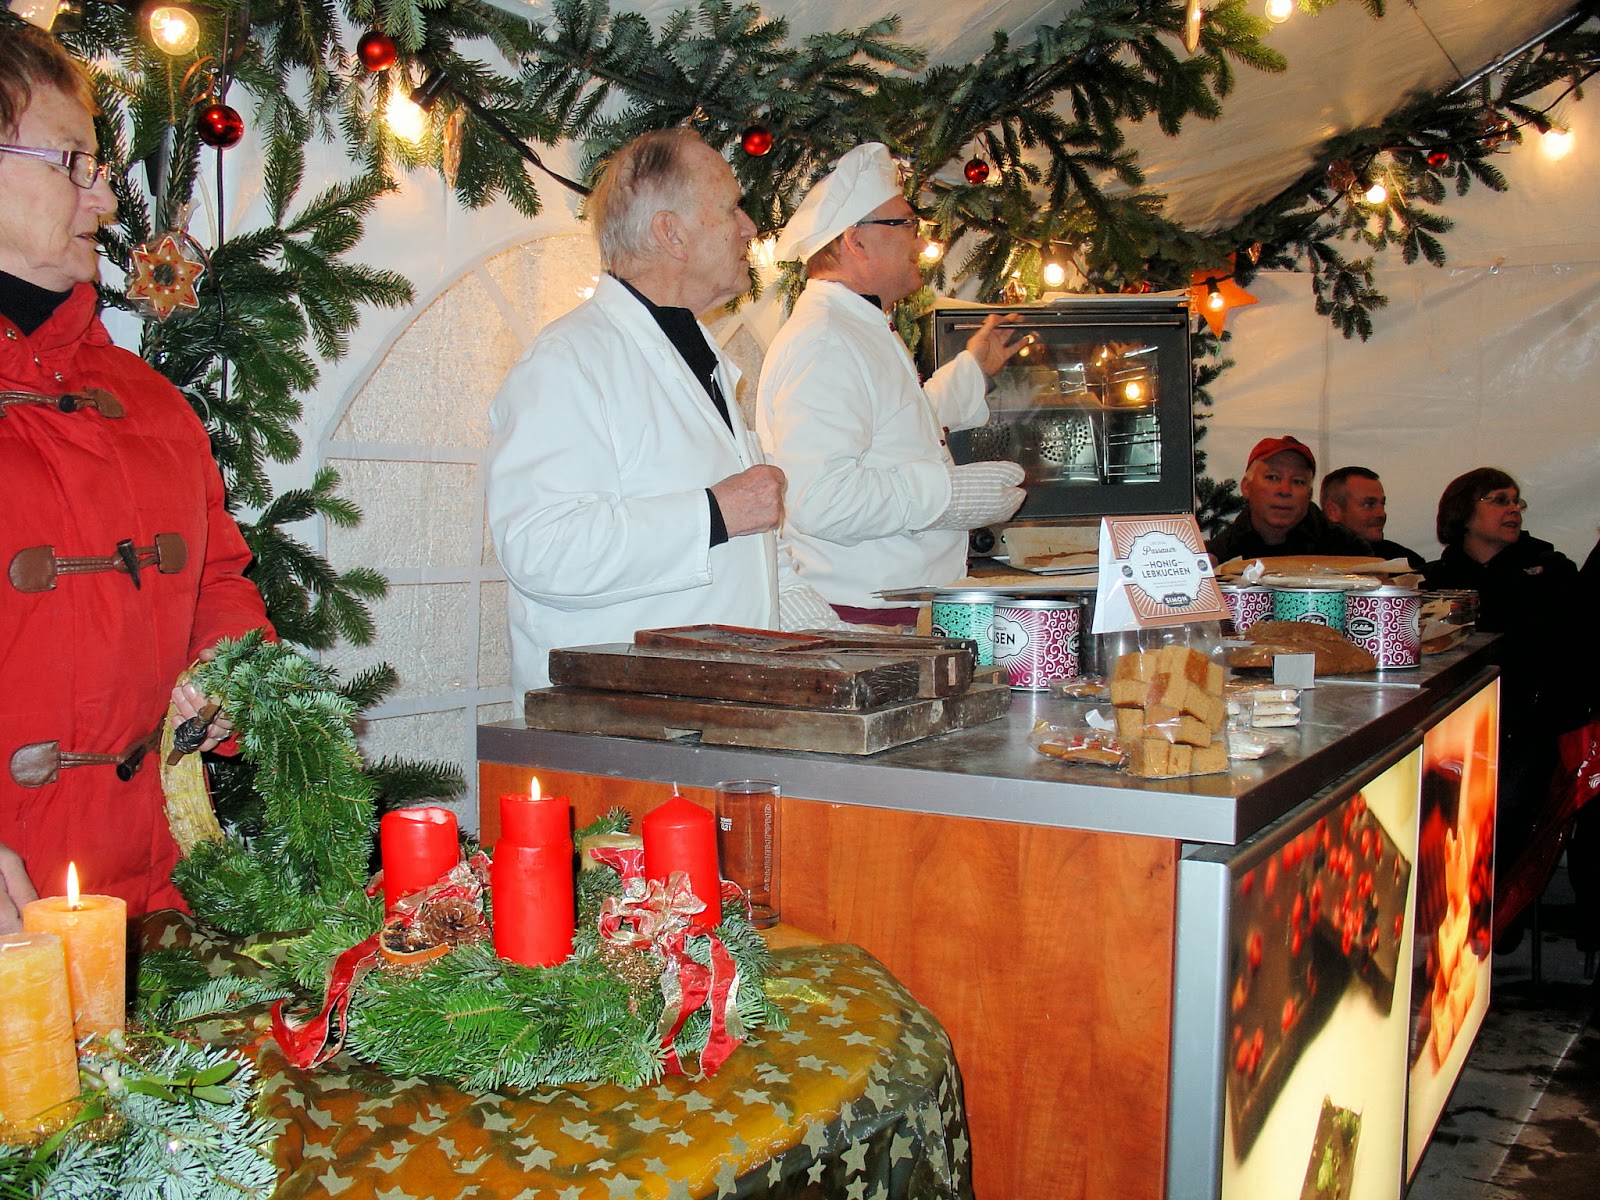 Gingerbread and Advent wreath-making demonstration inside a cozy little tent in Passau.